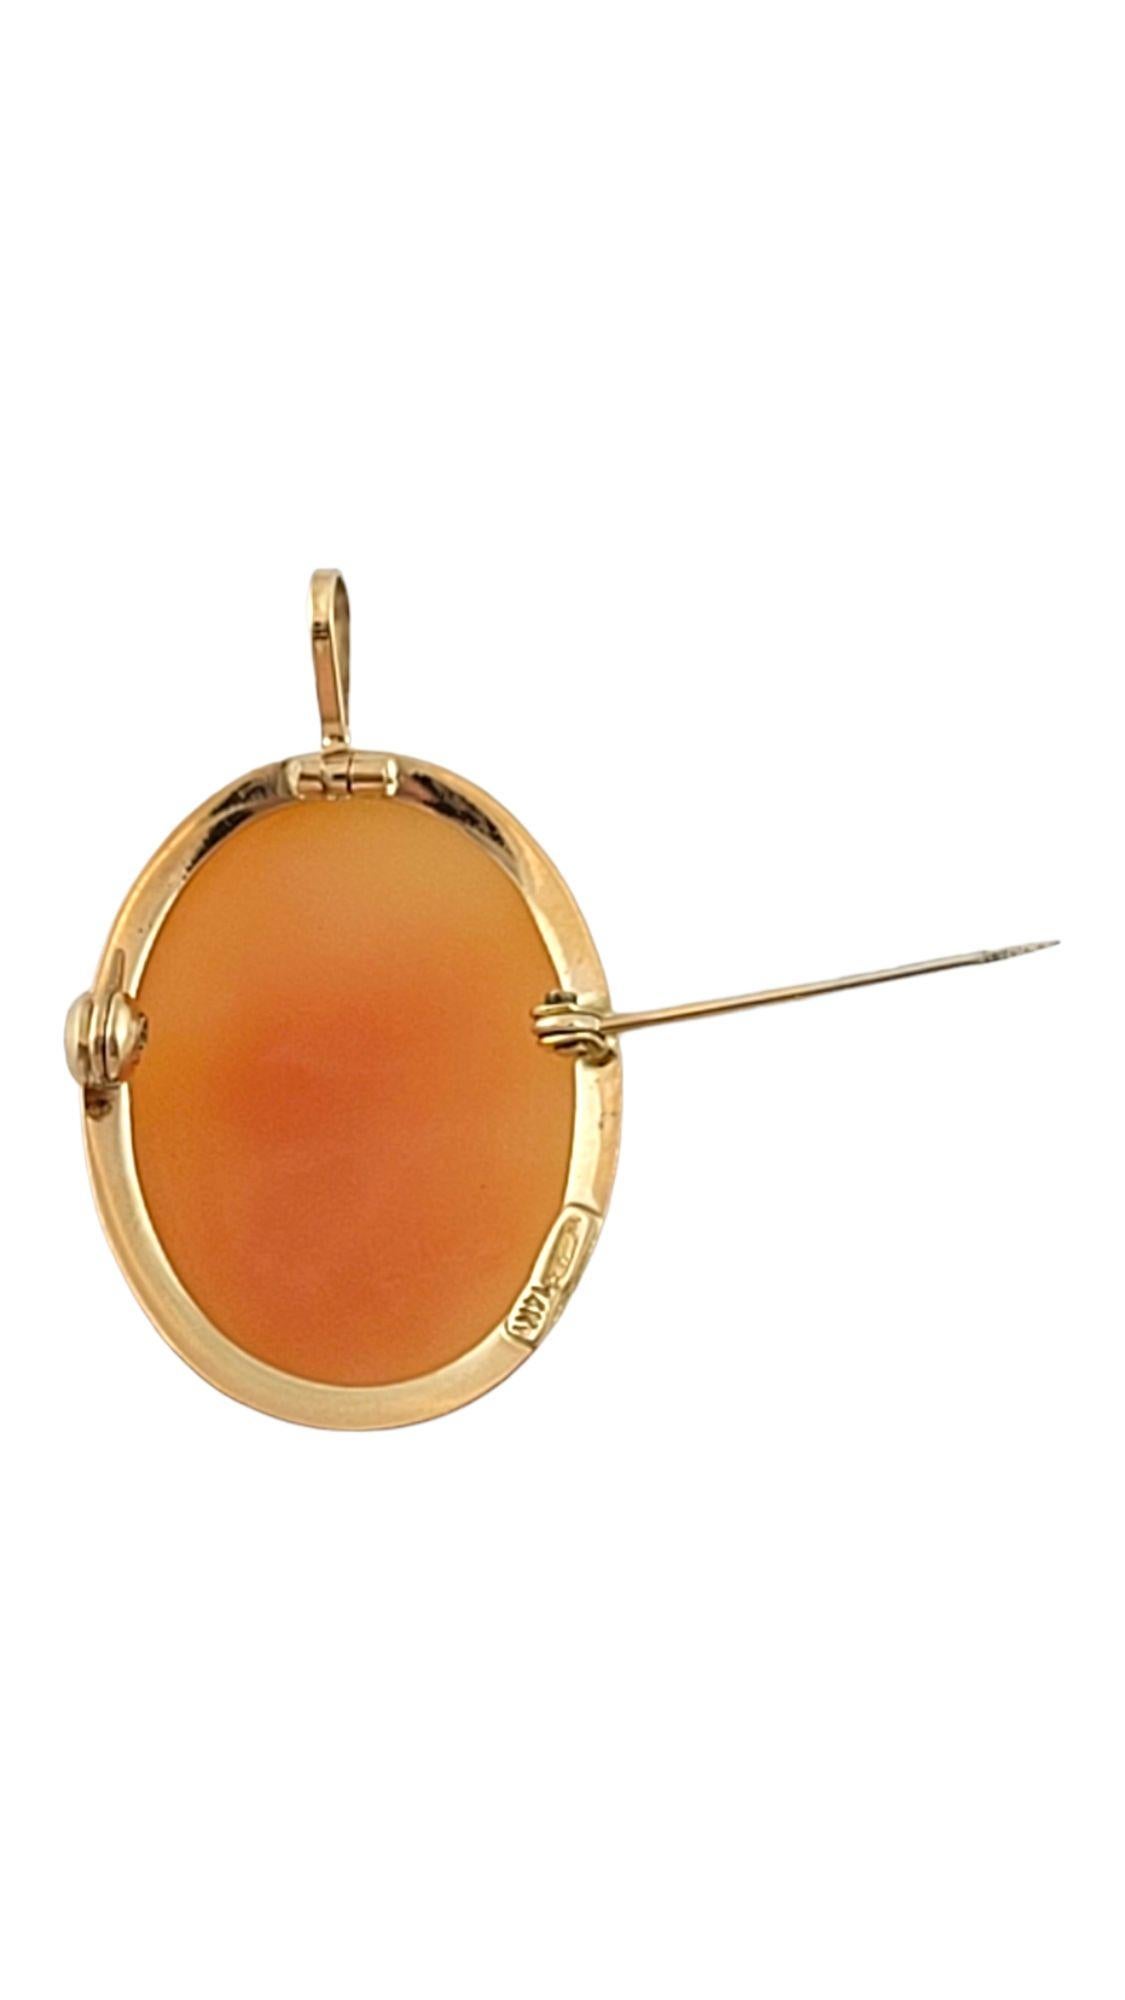 14K Yellow Gold Cameo Pin/Pendant #14619 For Sale 2